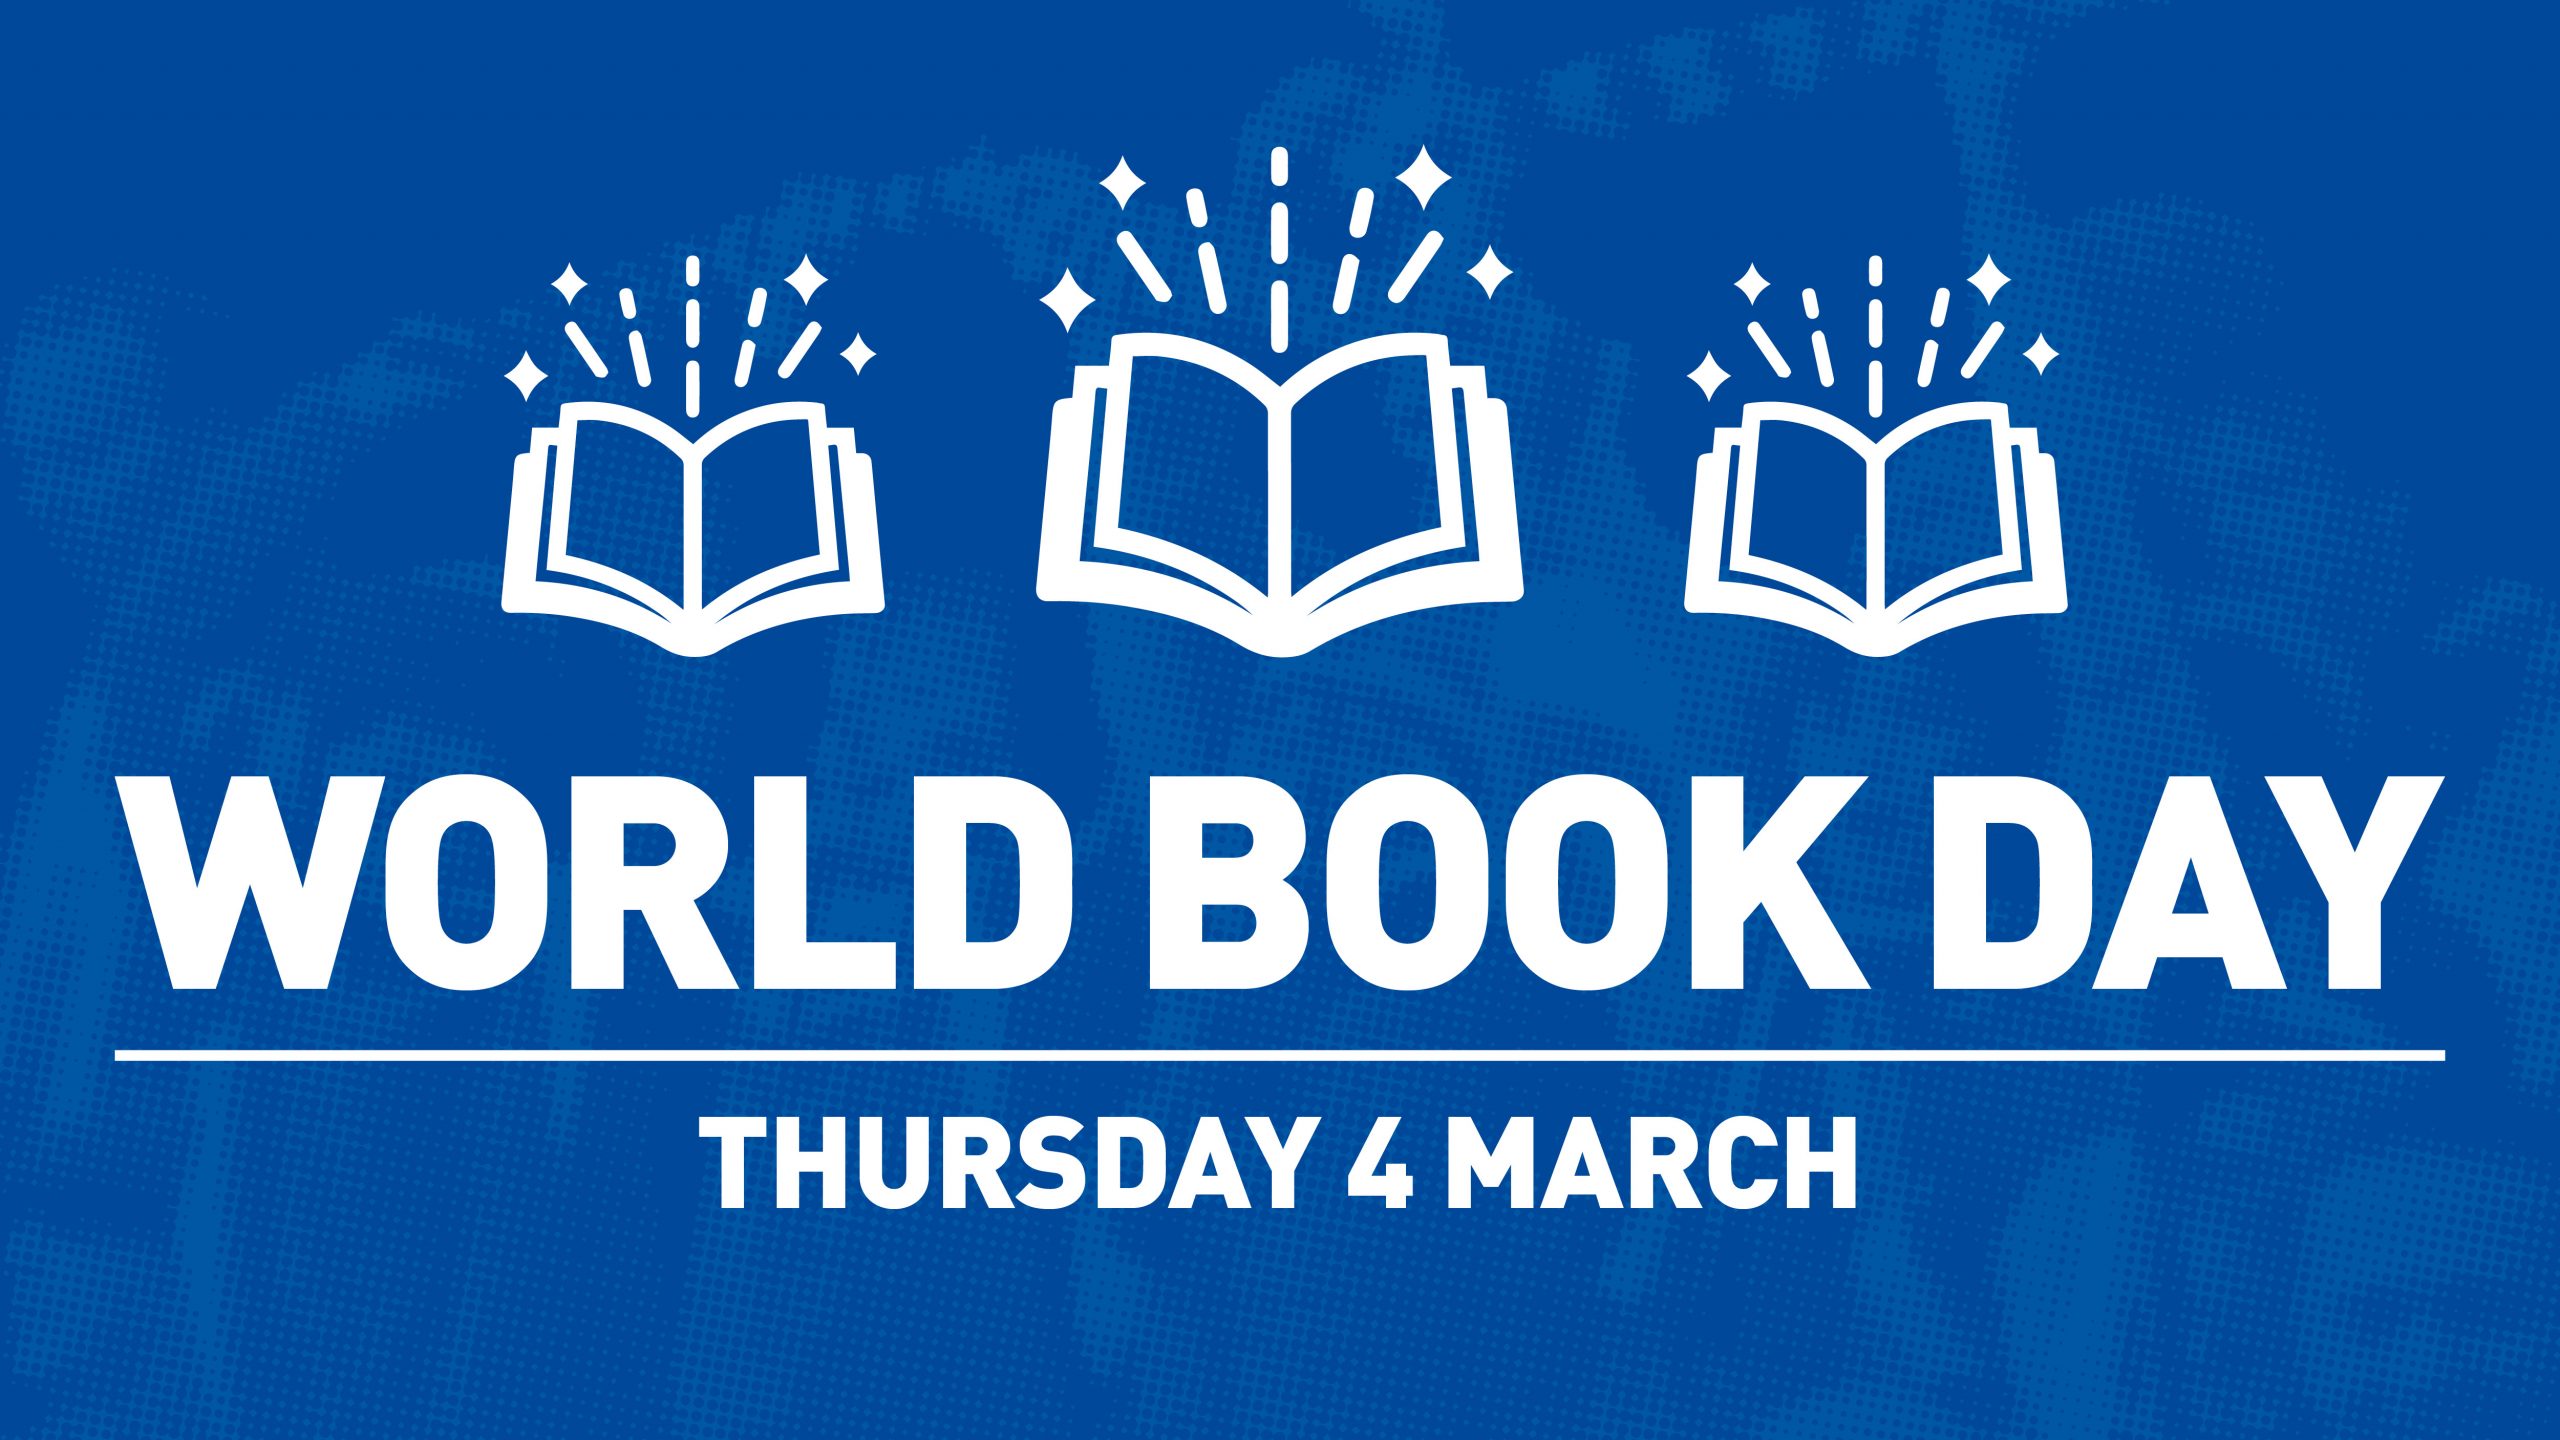 Albion encourages pupils to read for world book day